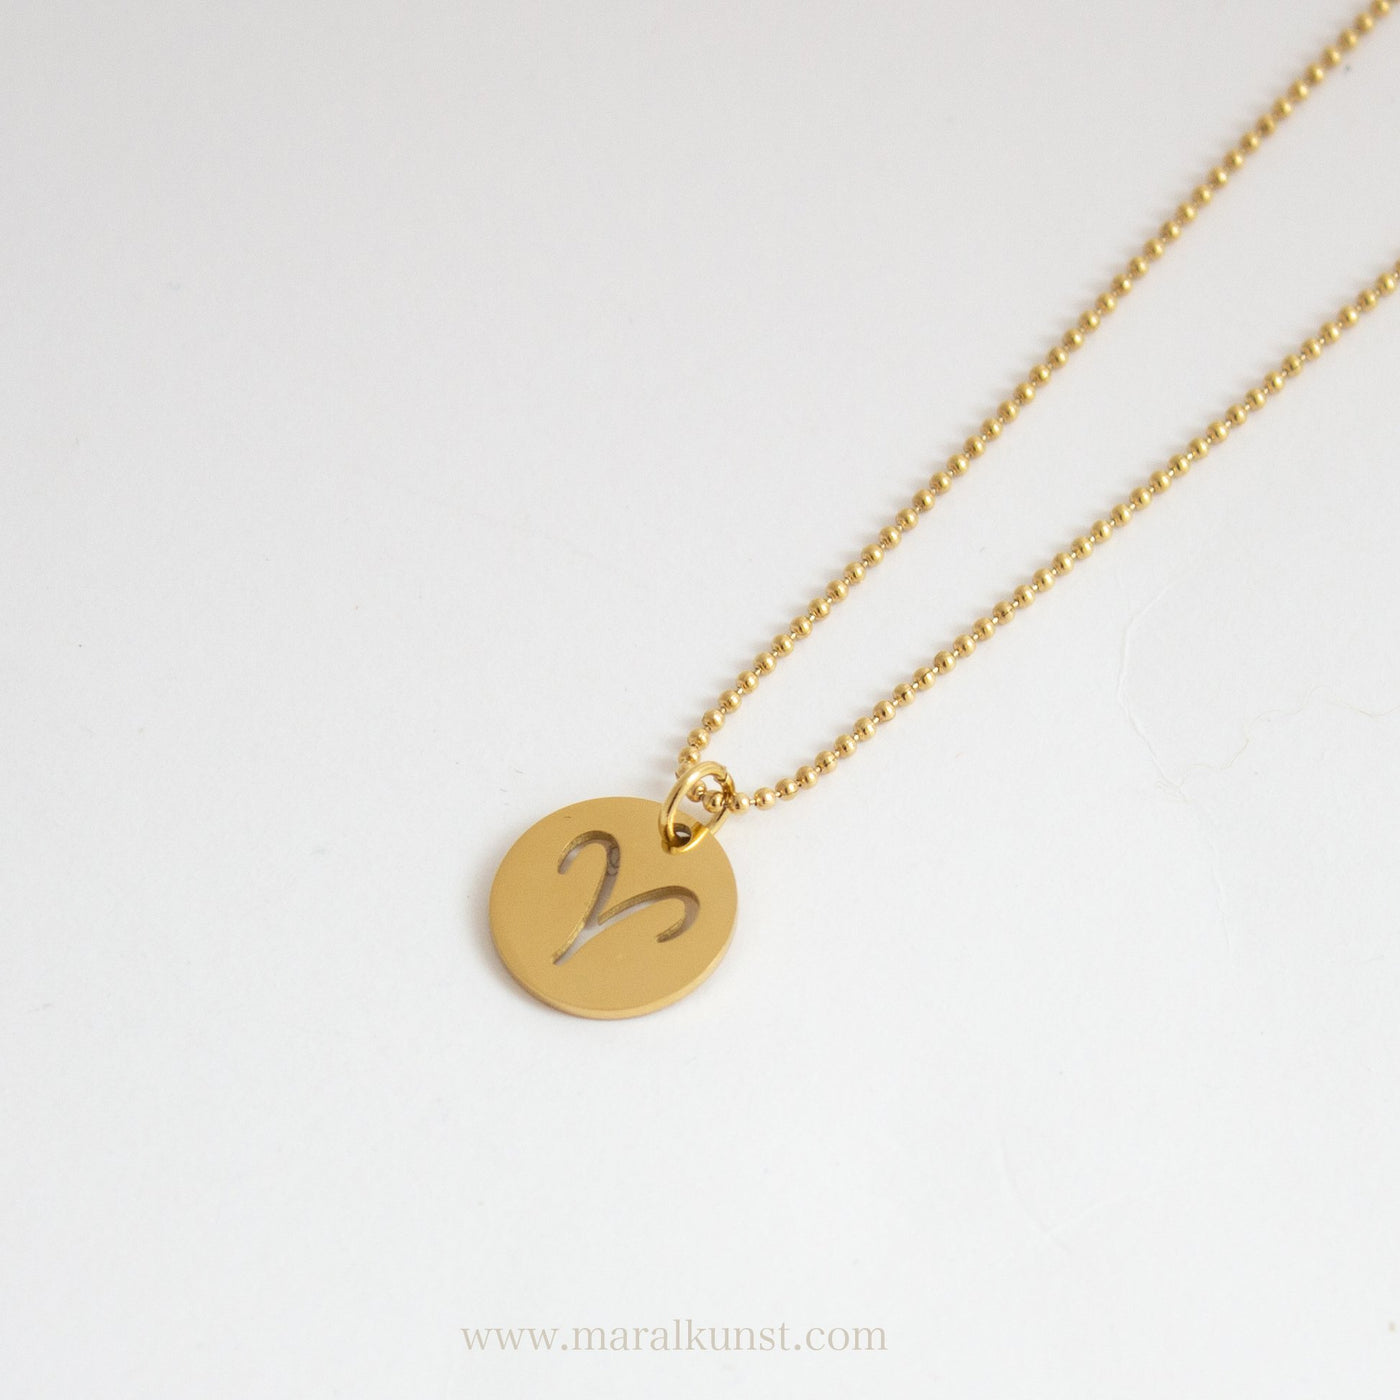 Aries Zodiac Sign Necklace - Maral Kunst Jewelry